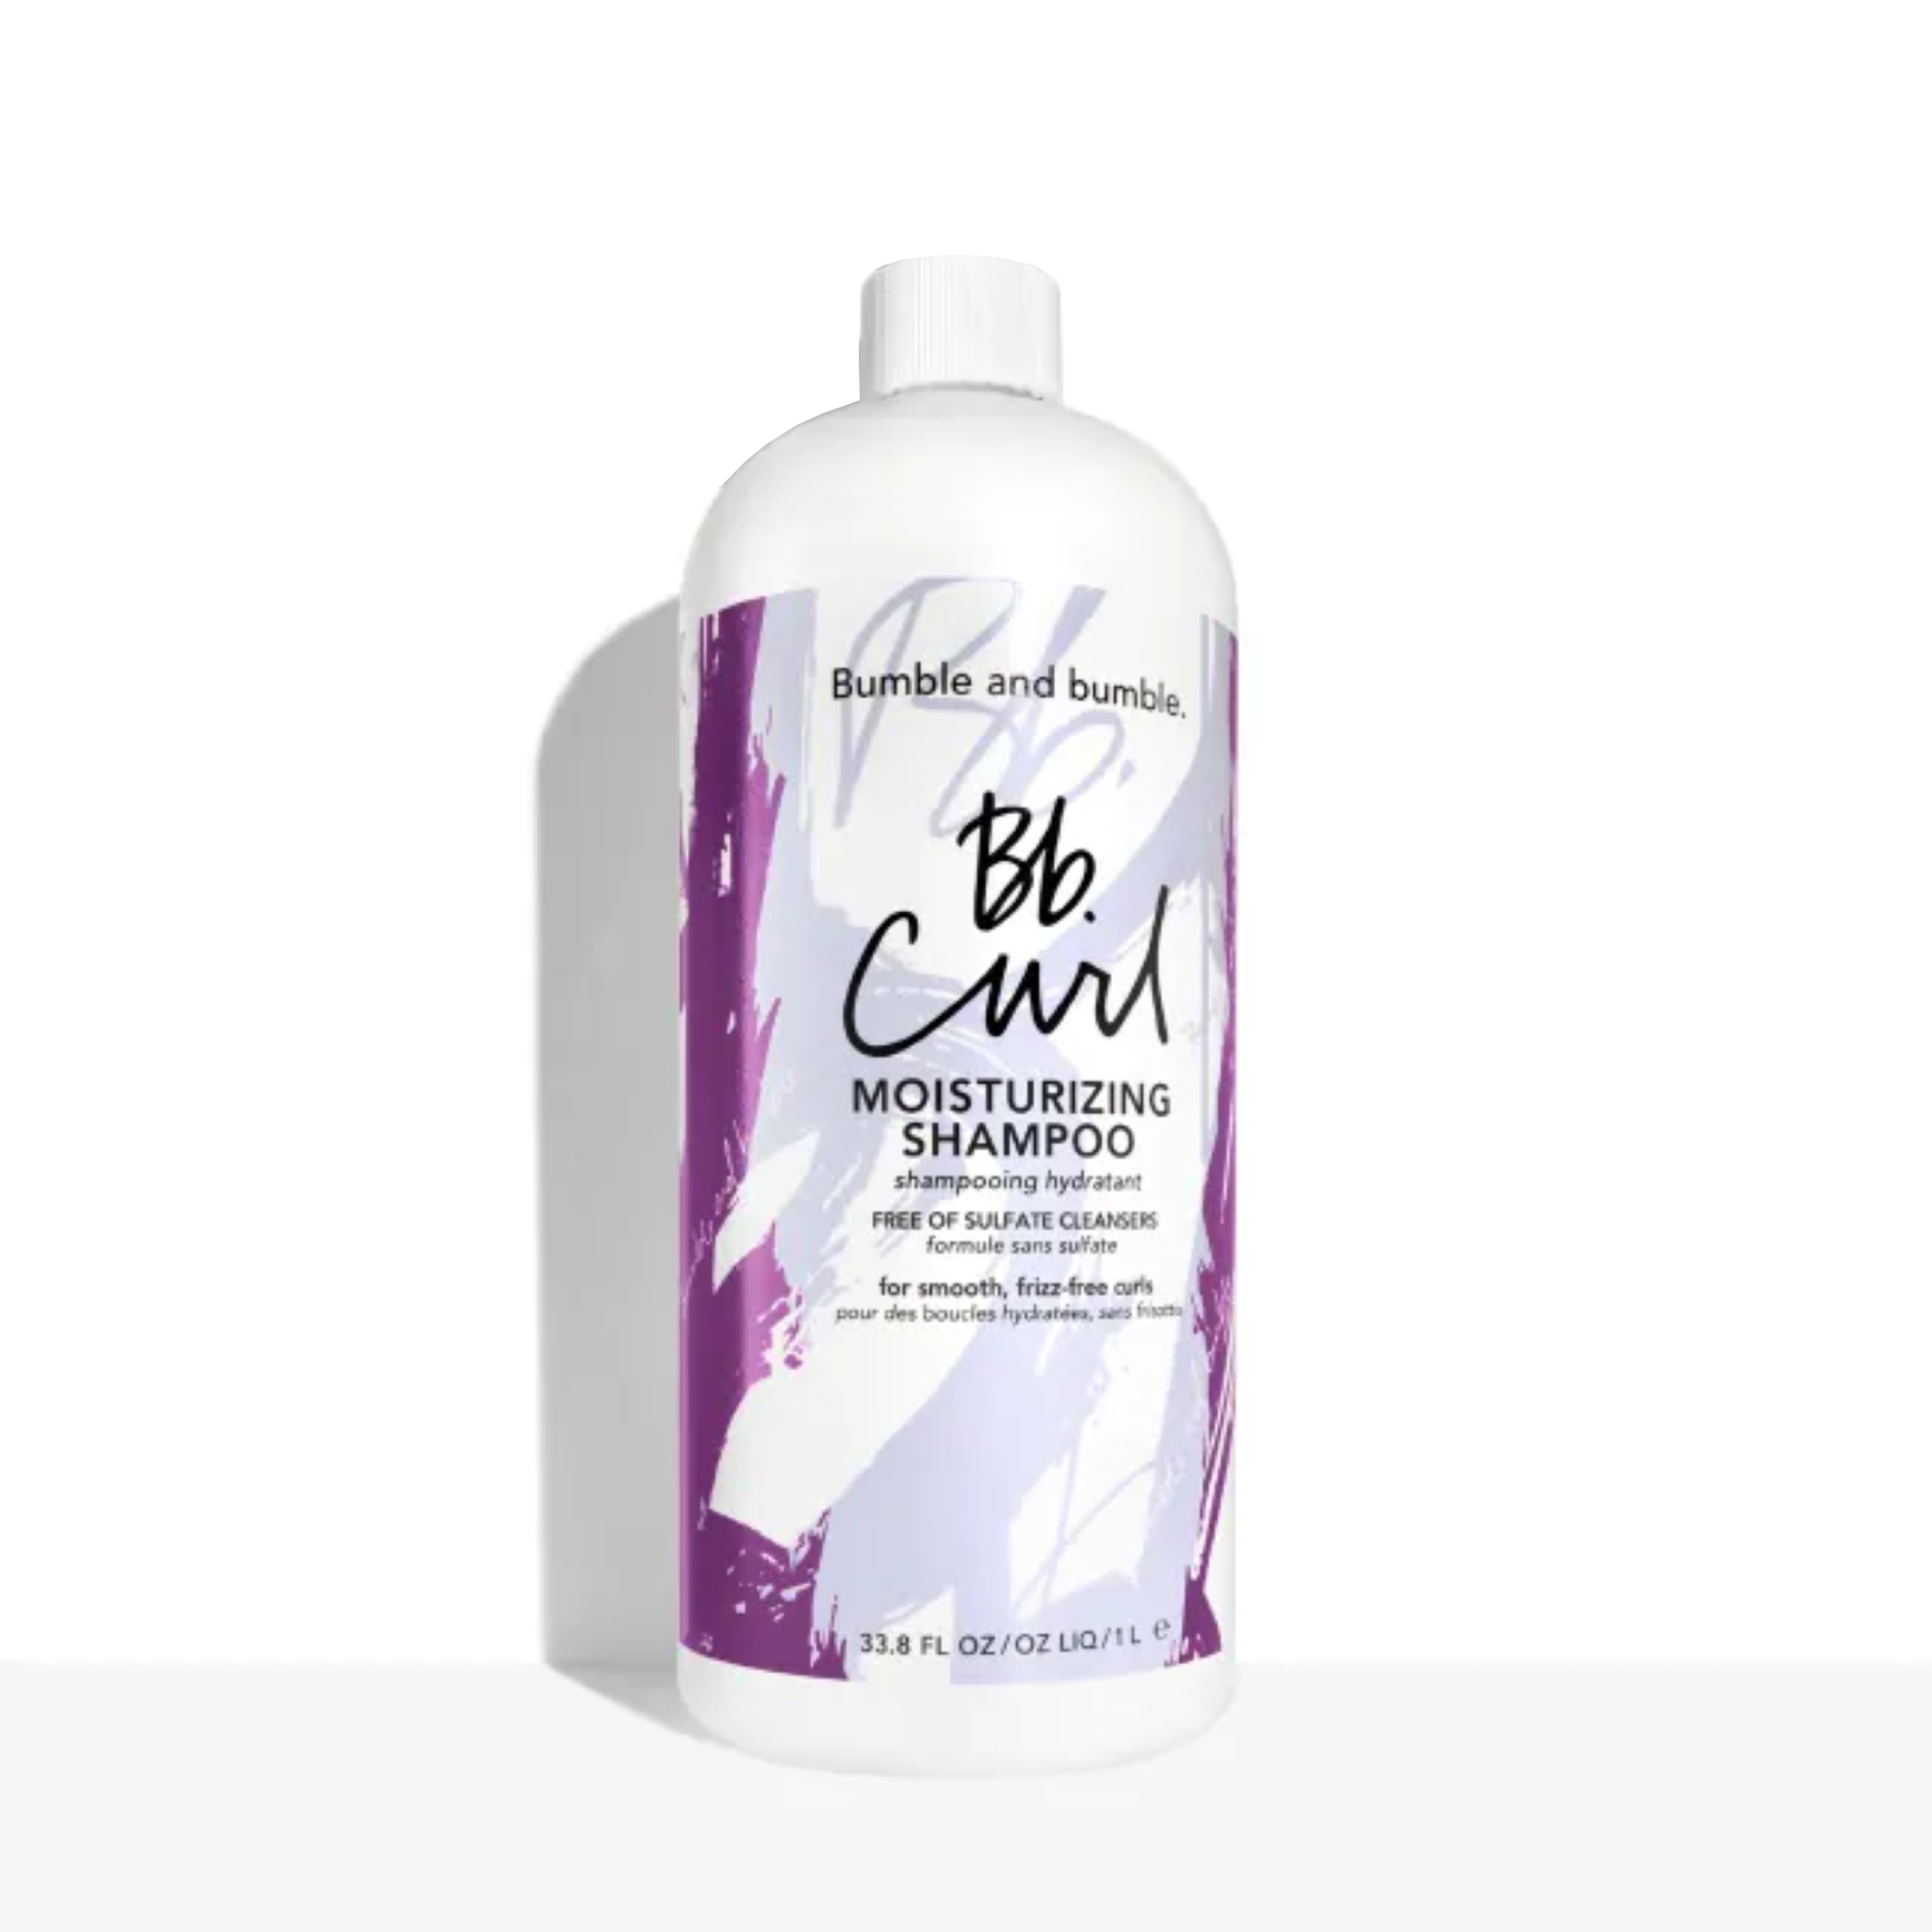 Bumble and bumble Bb.Curl Moisturizing Shampoo and Conditioner Liter Duo ($204 Value) / LITER